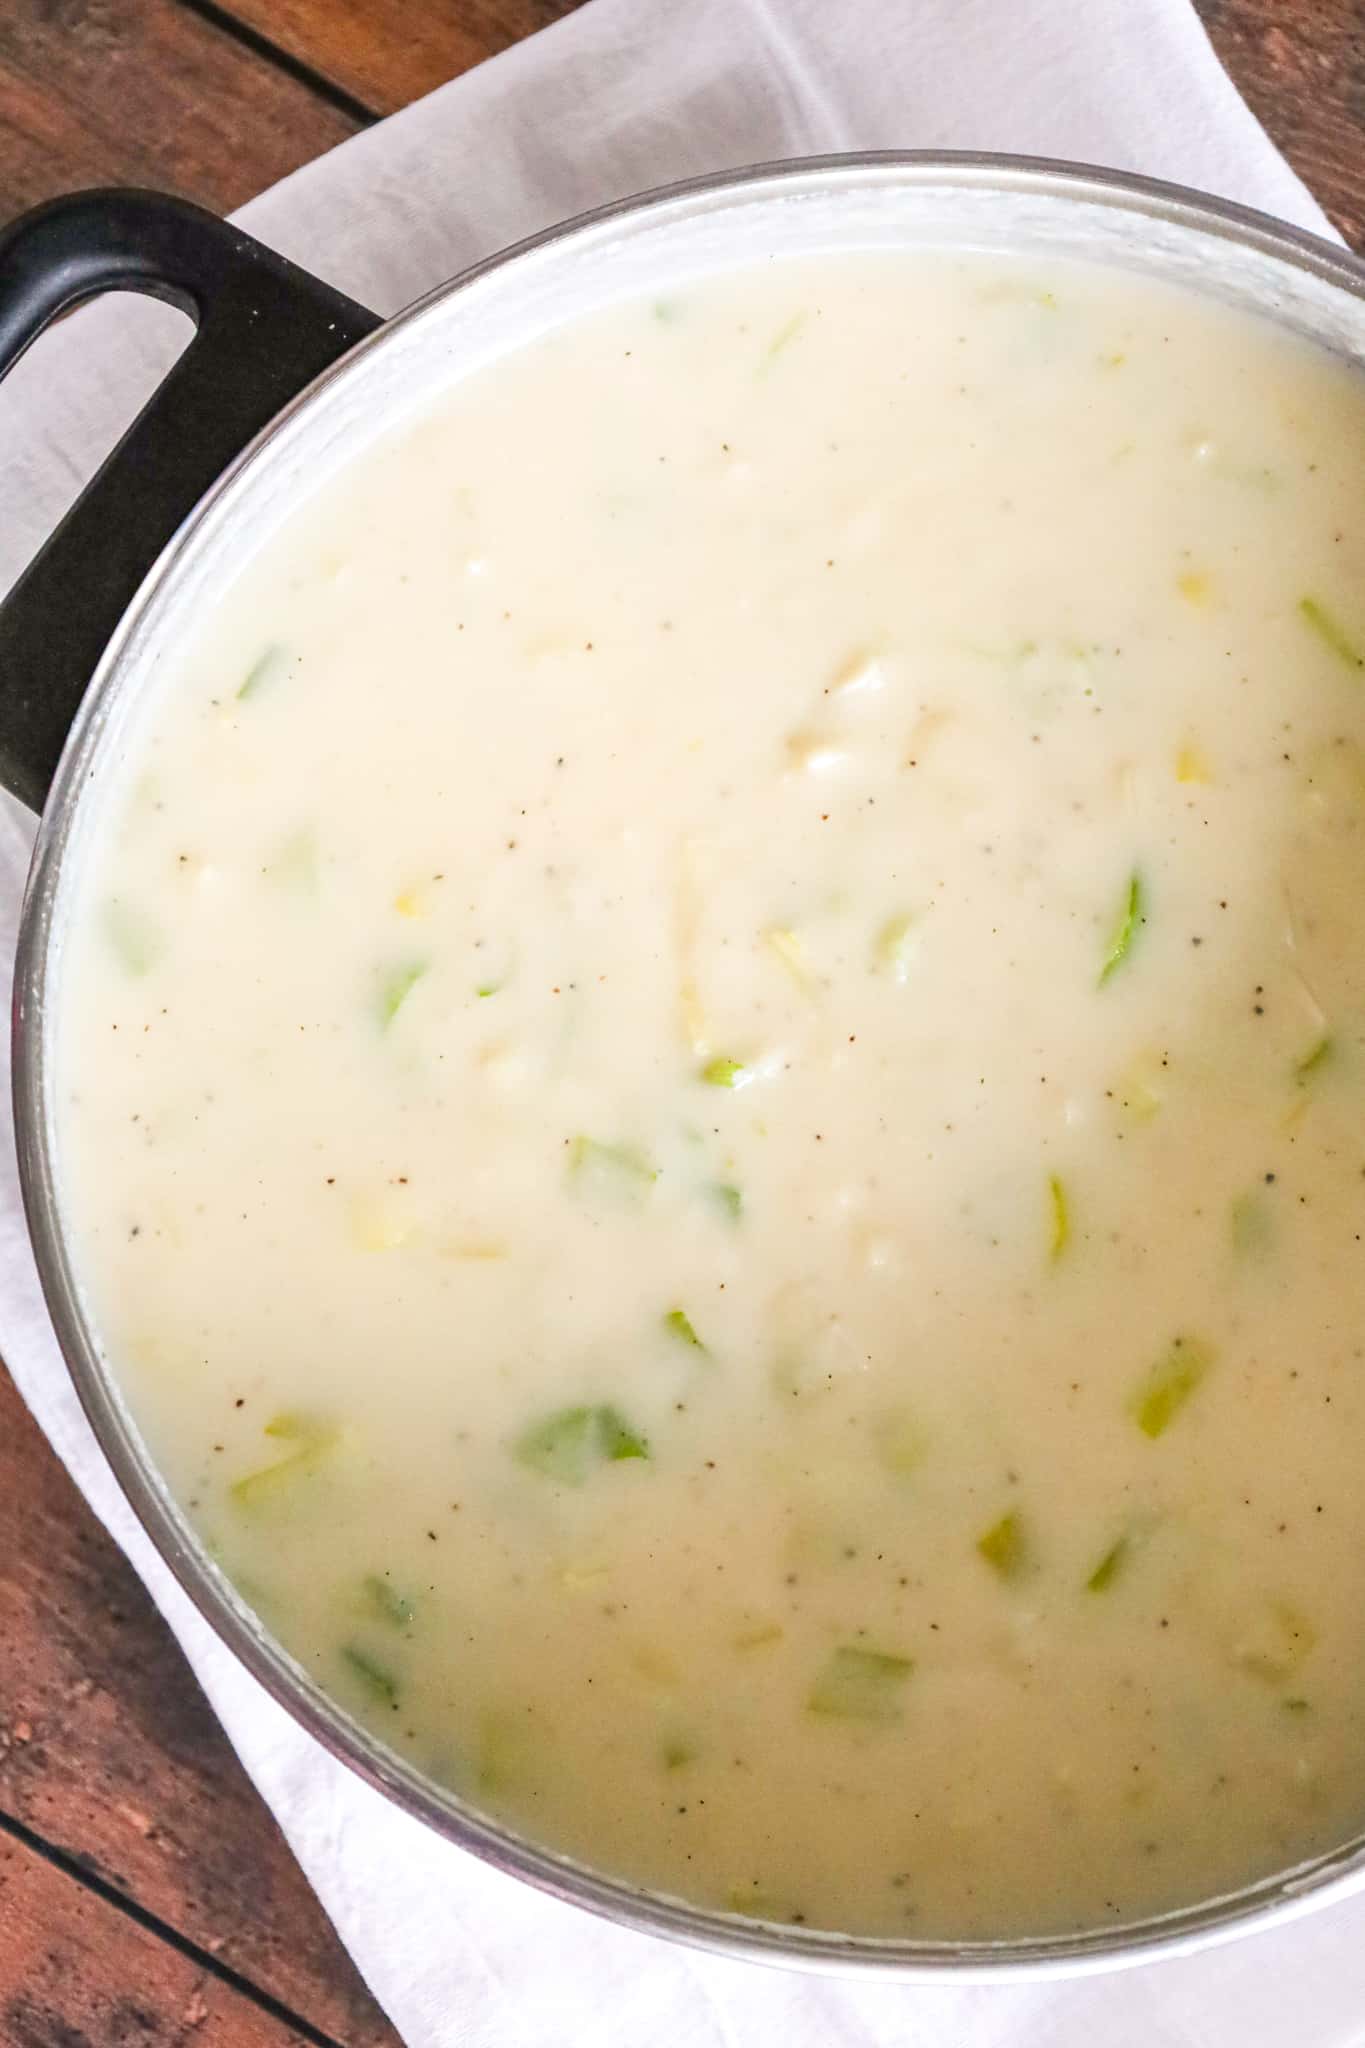 Easy Potato Leek Soup is a hearty soup recipe made with chopped leeks, instant mashed potatoes, chicken broth and milk.